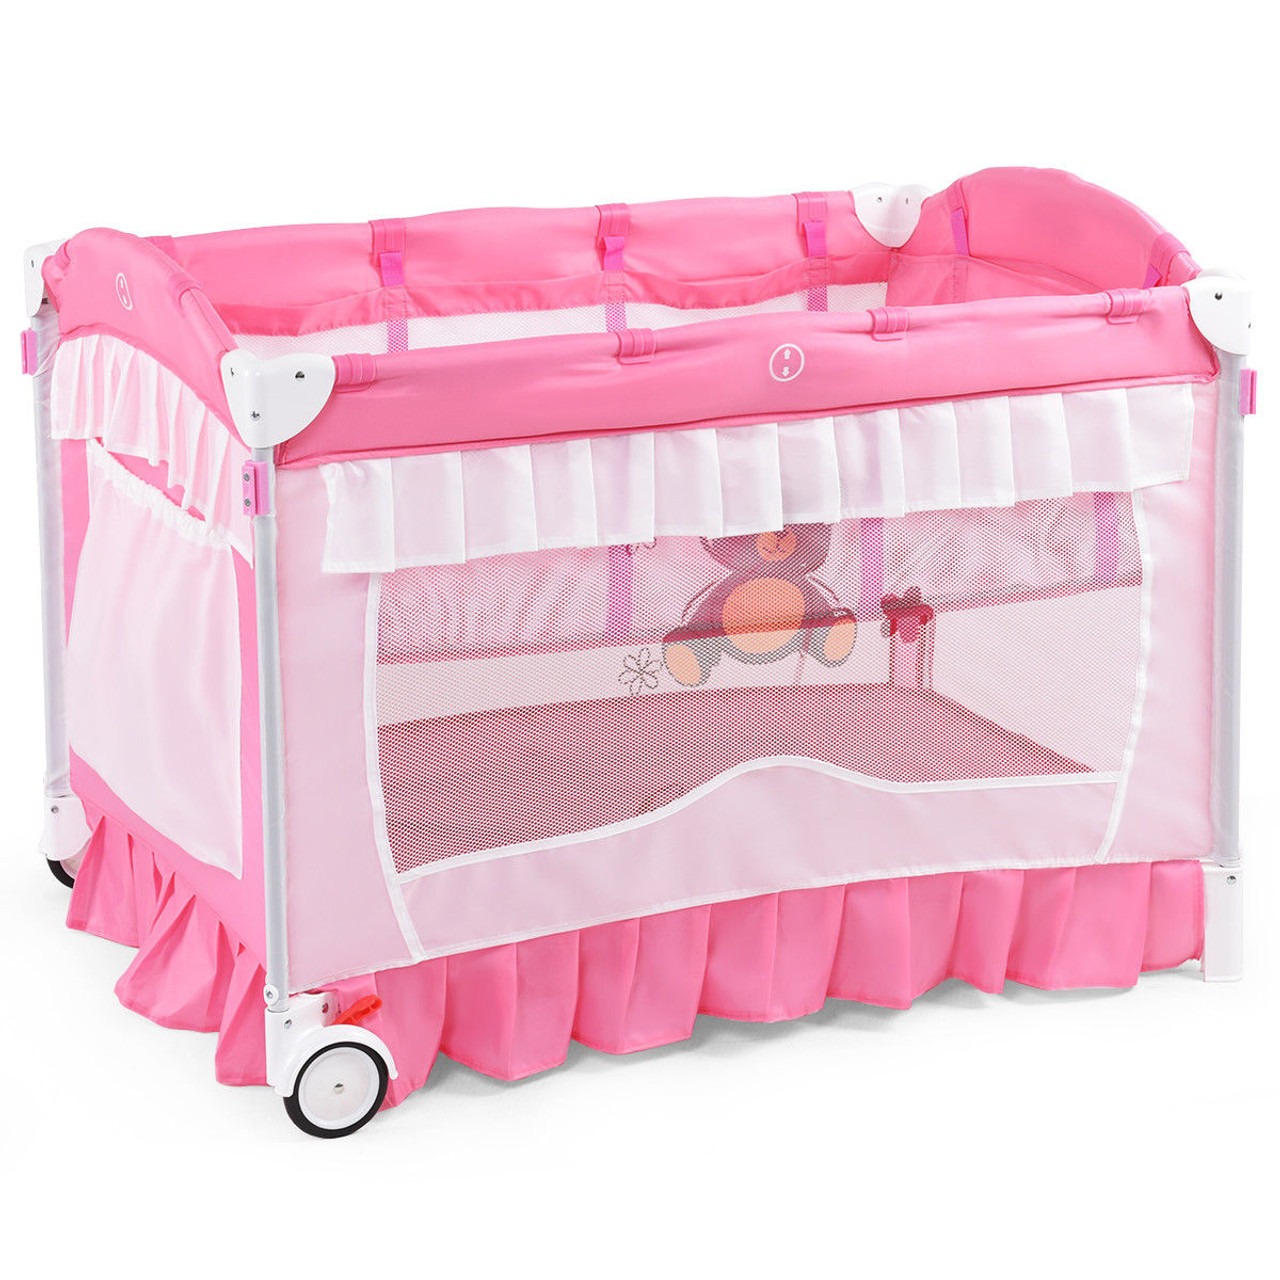 Babyjoy Portable Playpen with Cradle, Changing Pad, and Net product image